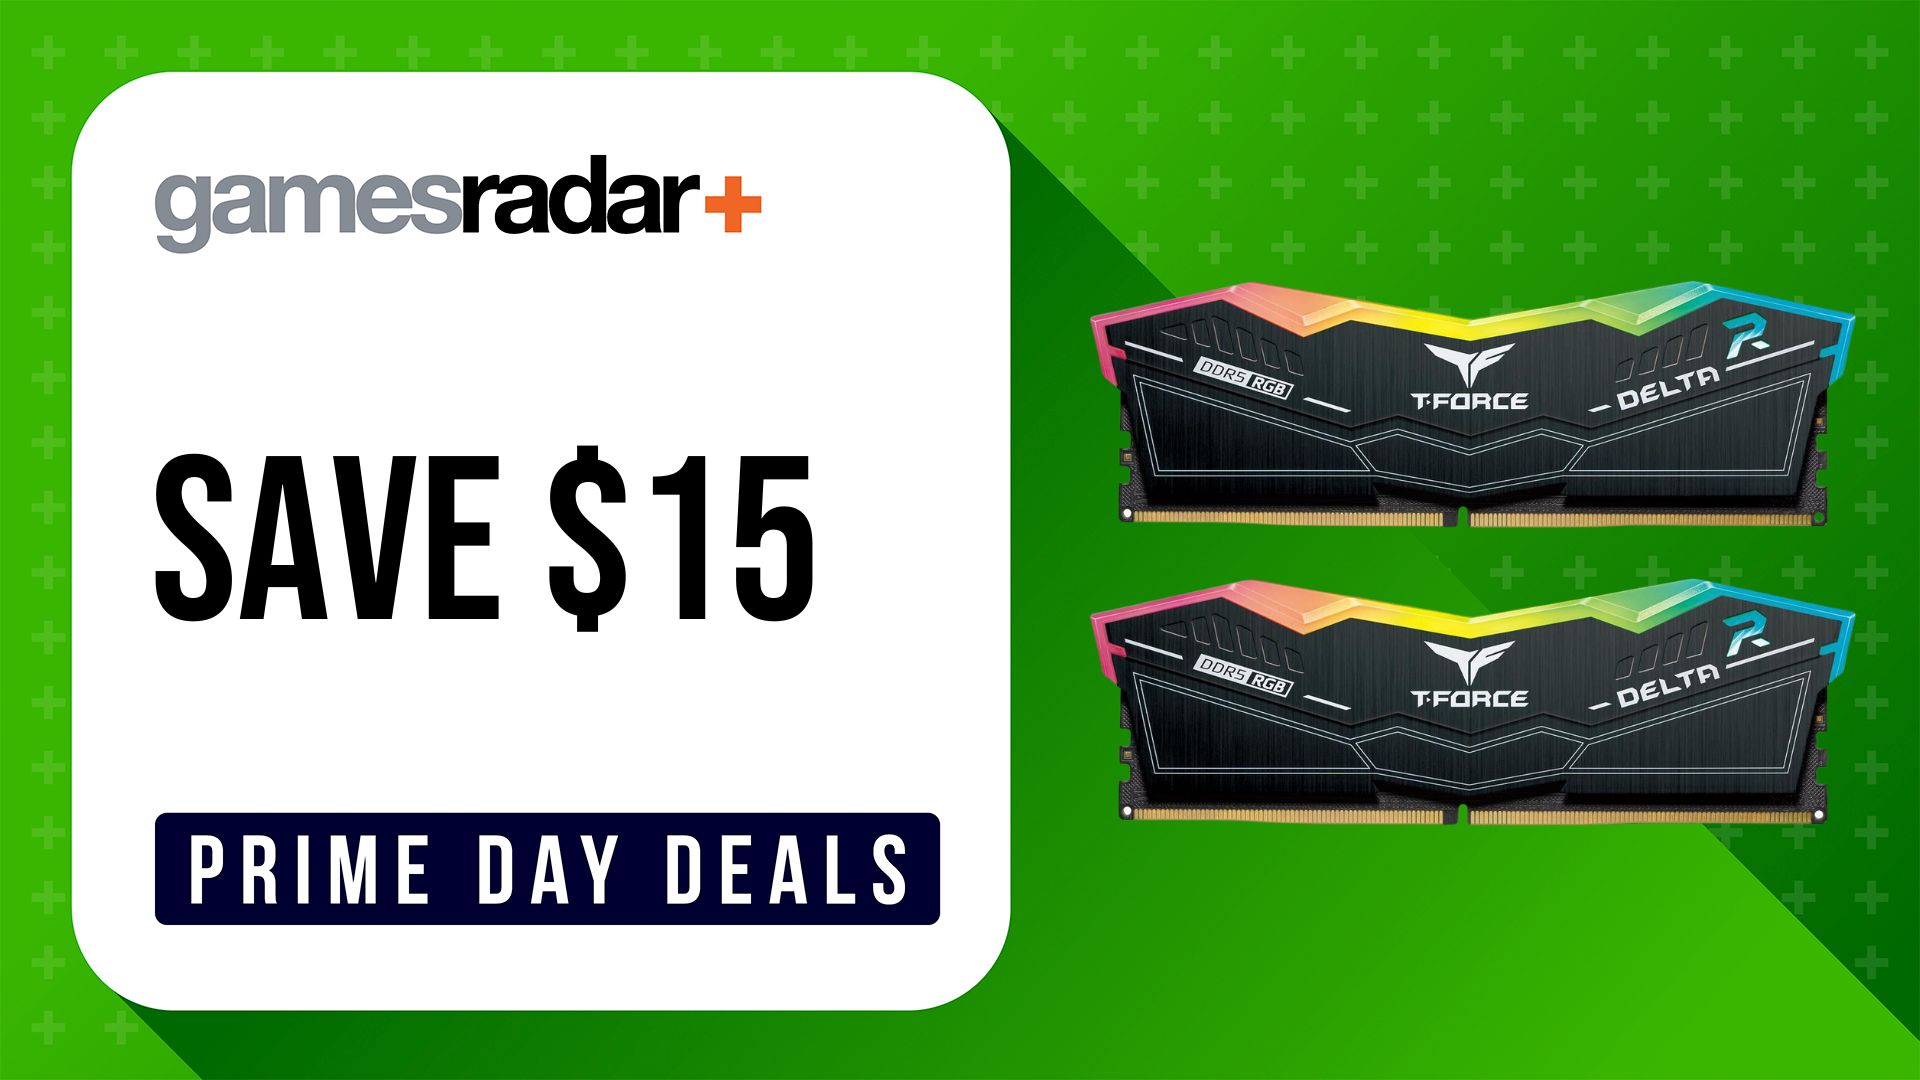 TEAM T-Force Delta RGB DDR5 (32GB) memory kit as a part of Newegg's Prime Day gaming PC deals with $15 saving and green background